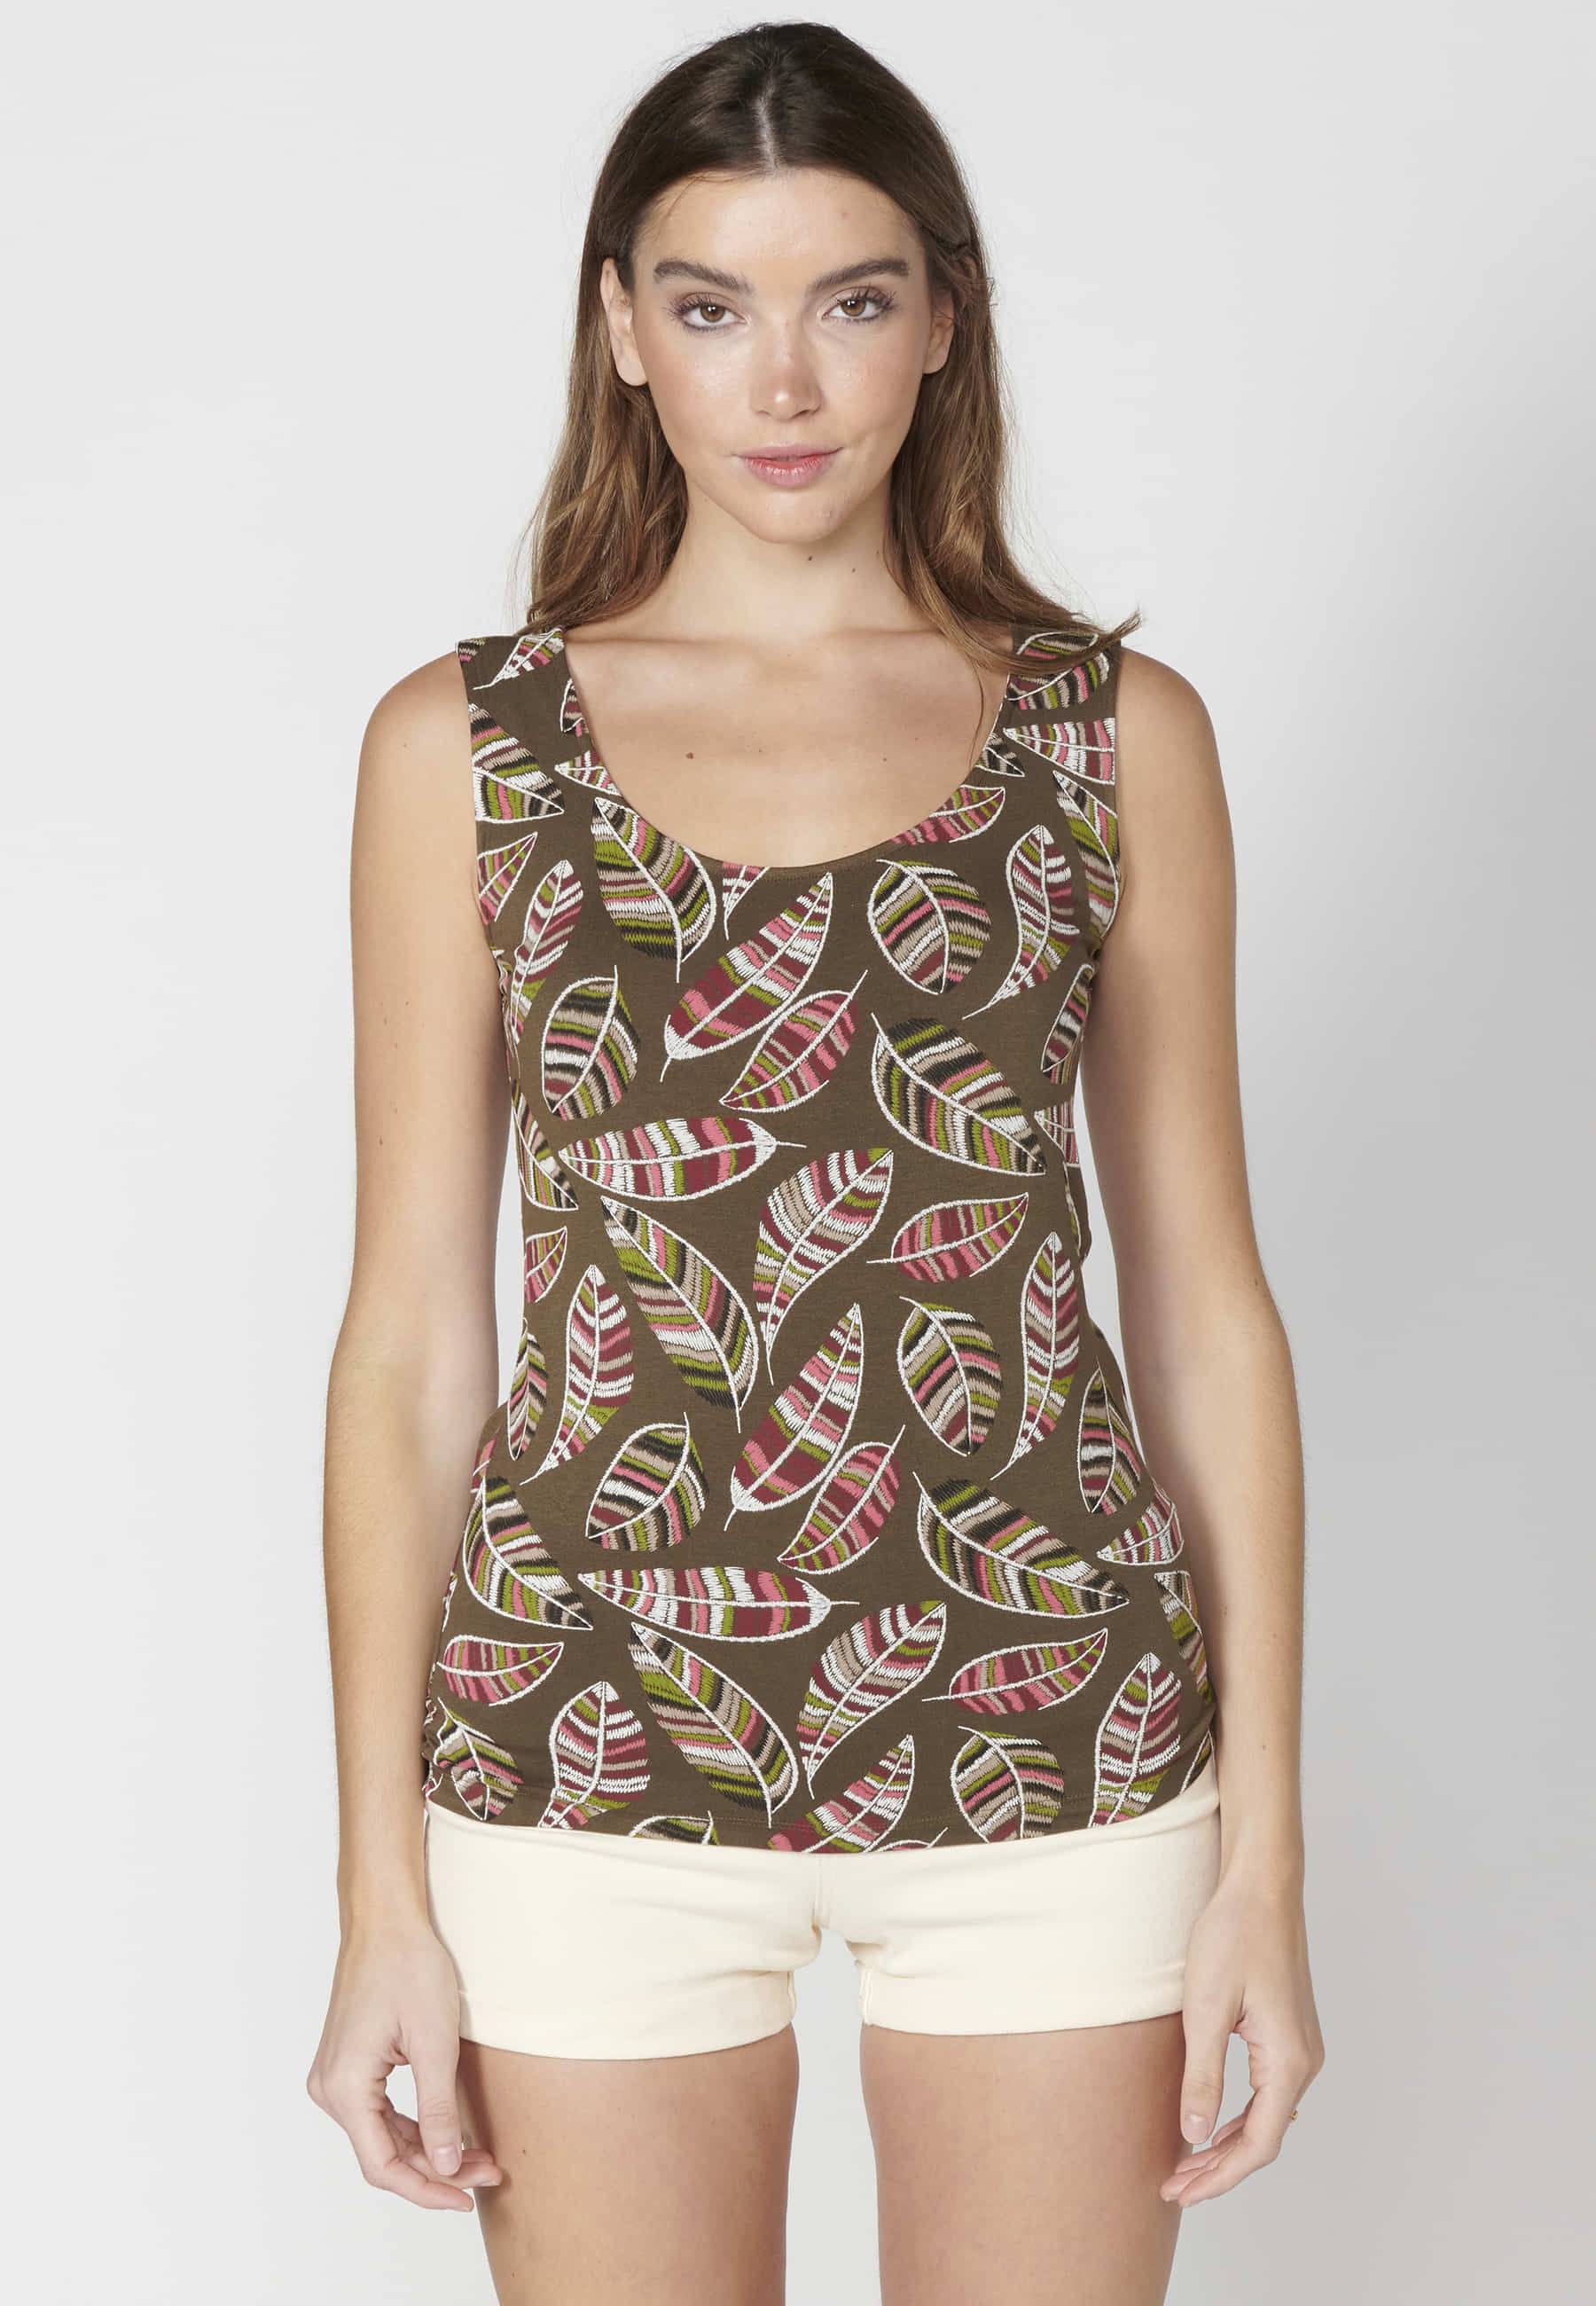 Kaki ethnic print strappy top with lace details for Woman 3